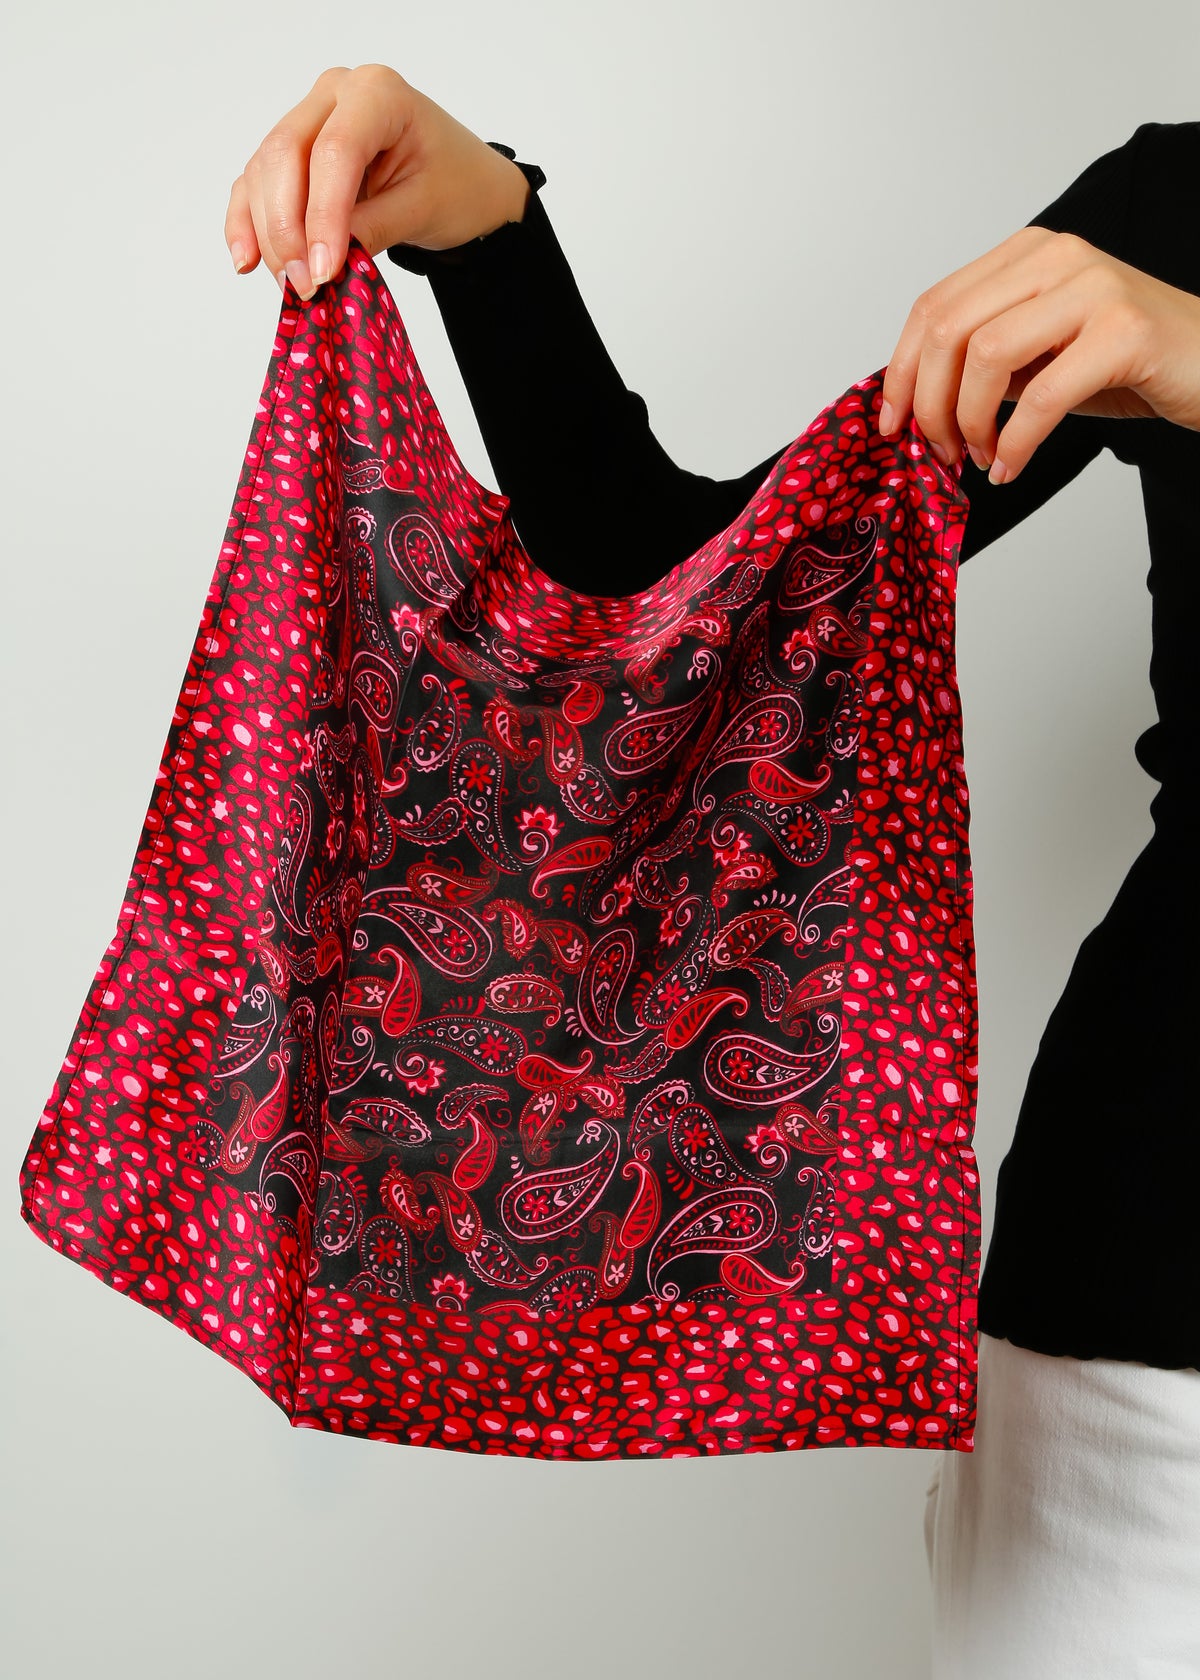 PPL Pheobe Small Scarf in Leo, Paisley Pink